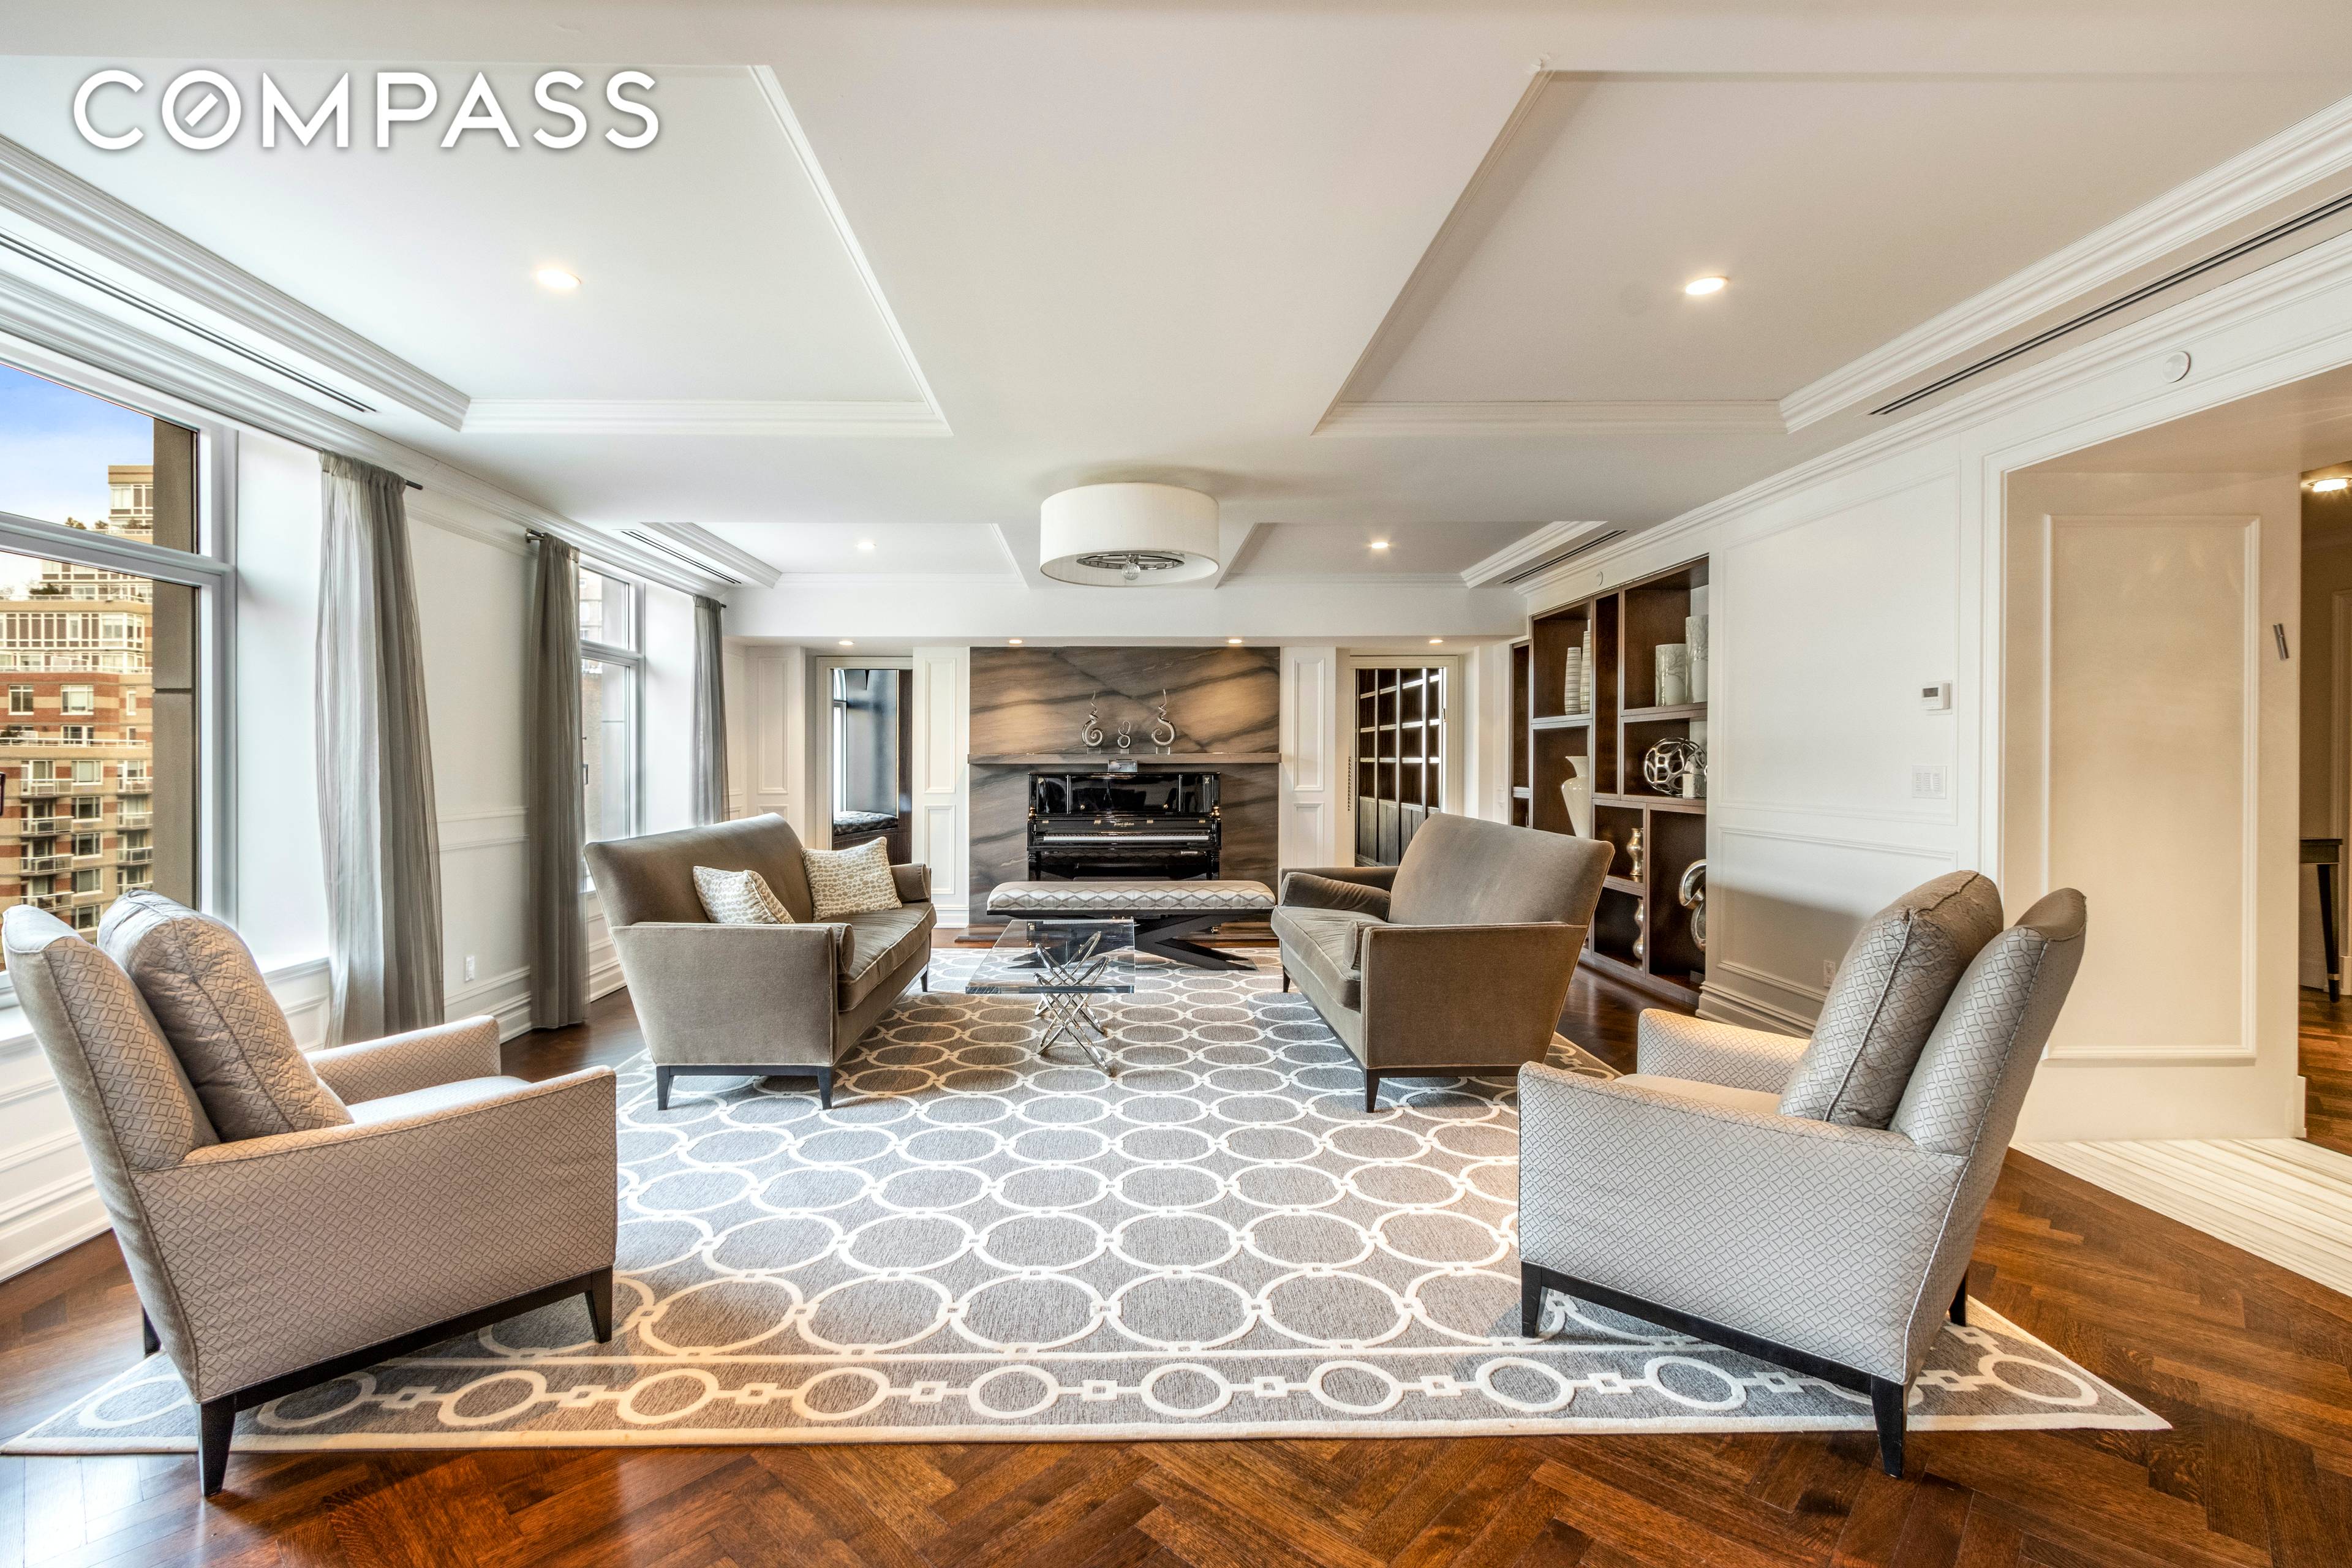 This sophisticated and elegant, full floor condo offers stunning scale and the most exquisite luxury and contemporary interior design, while incorporating classic, old world details.